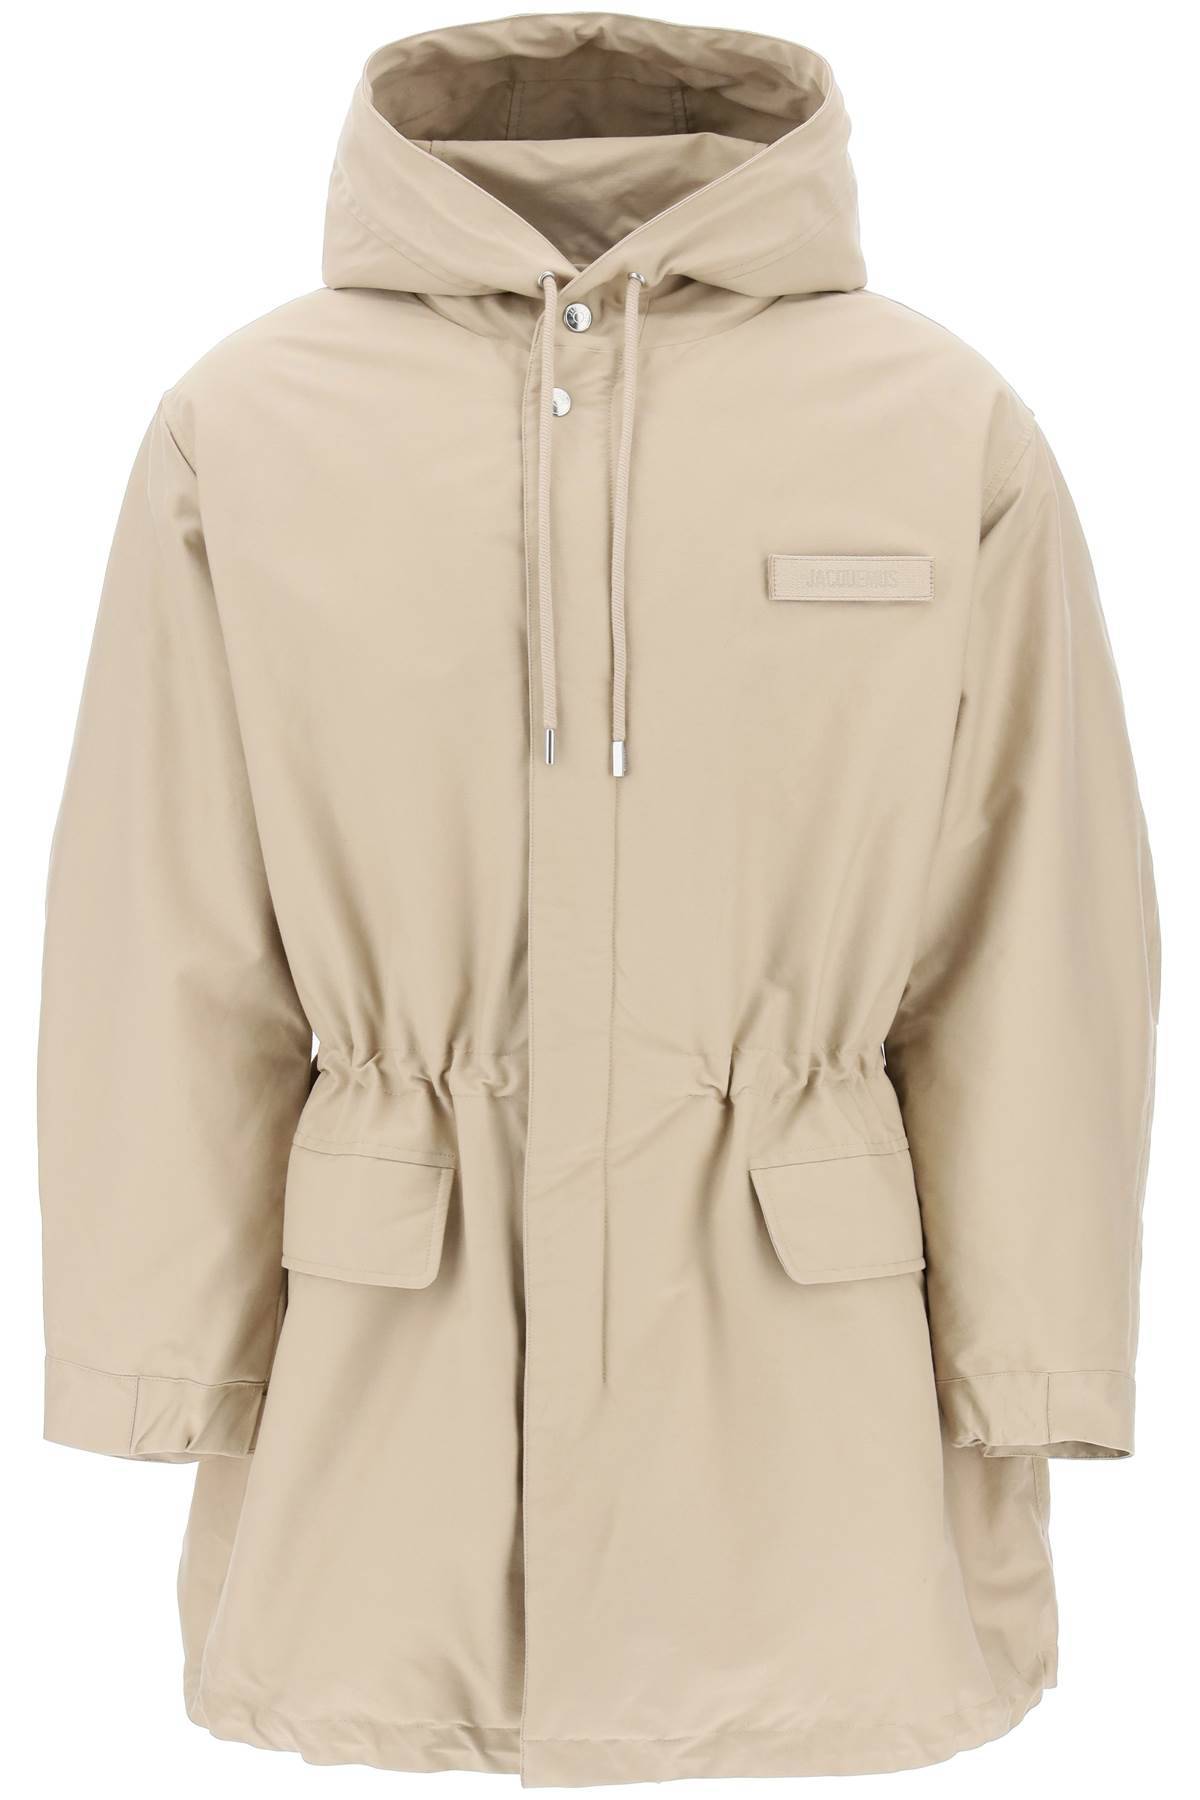 Jacquemus JACQUEMUS padded parka 'the brown